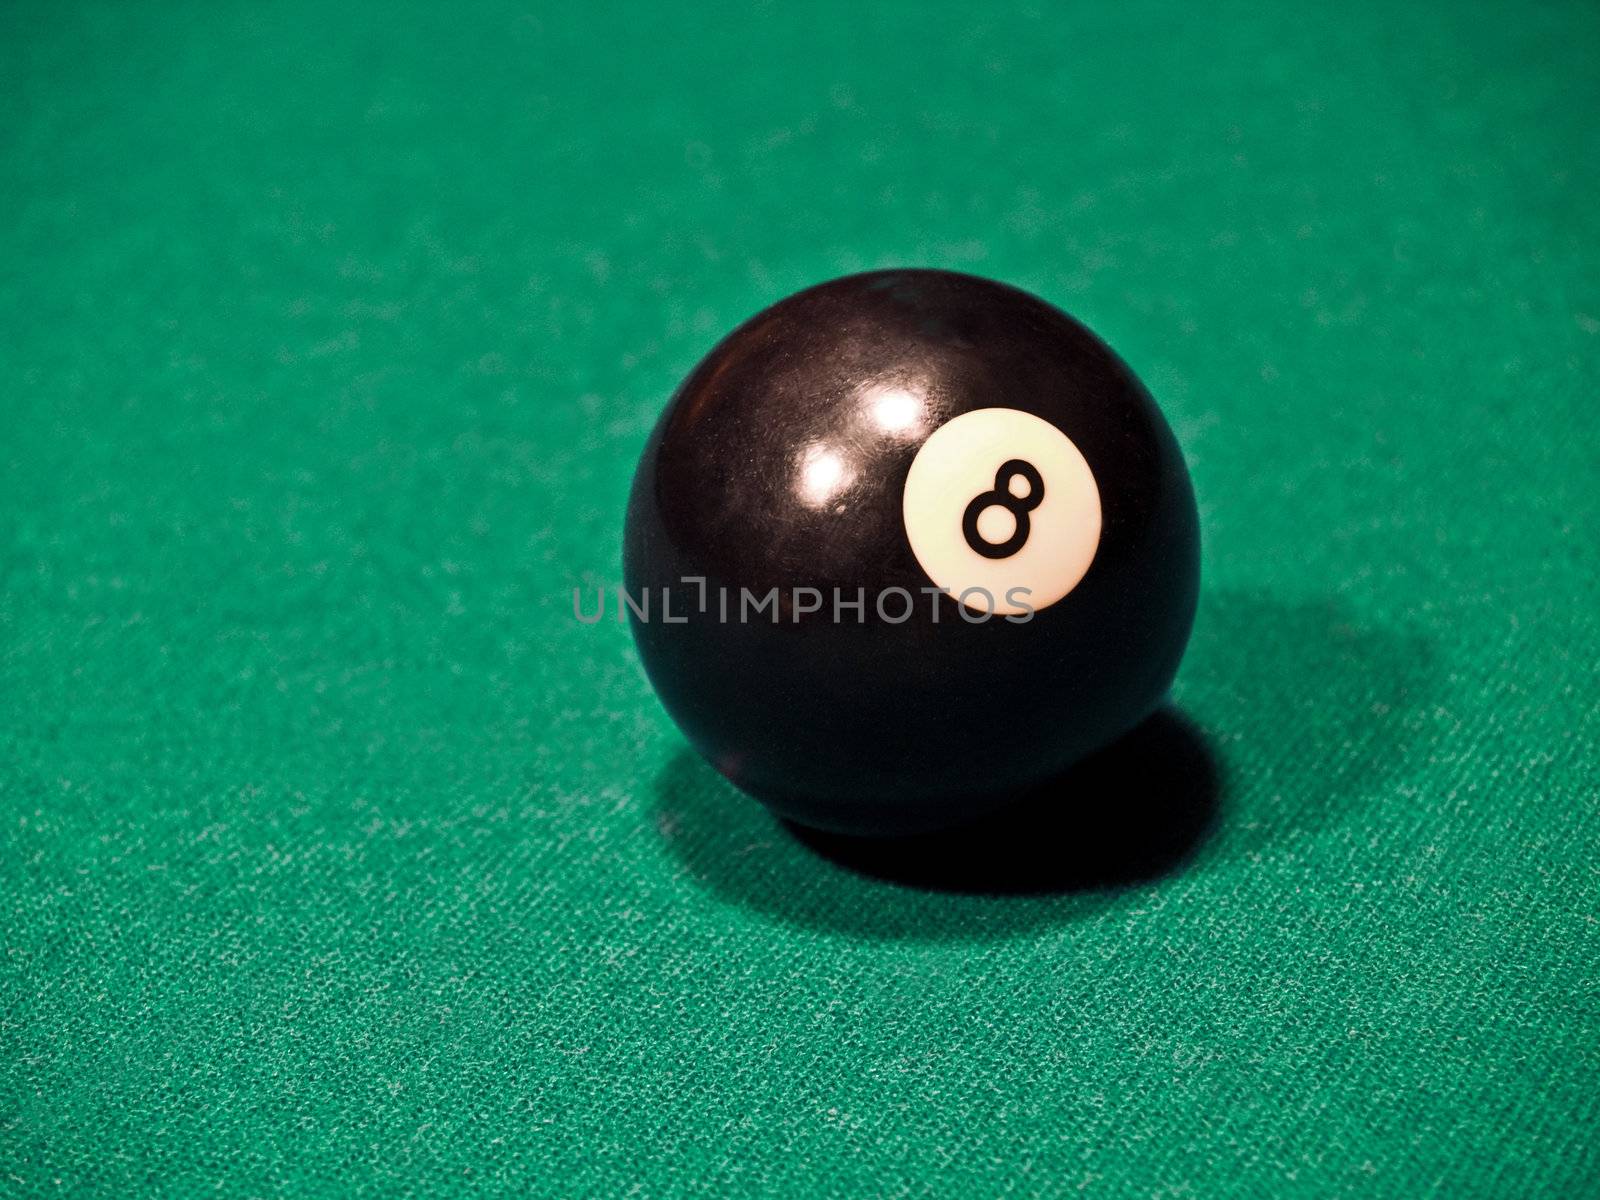 An Eight Ball on a Green Billiards Table by Frankljunior